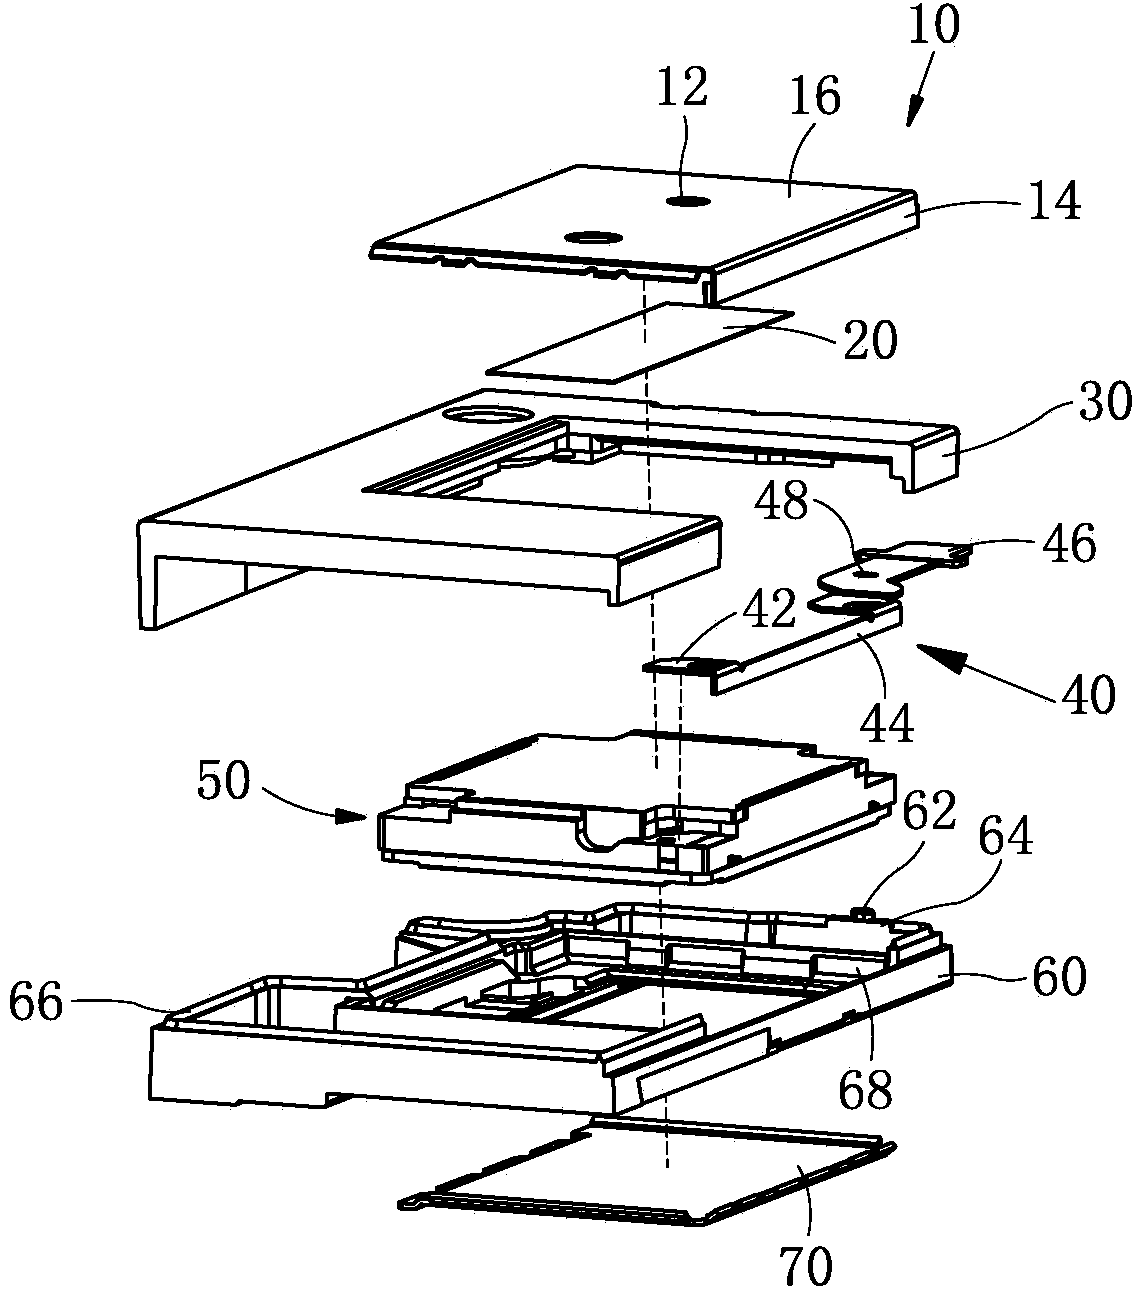 Loudspeaker module and assembly method thereof